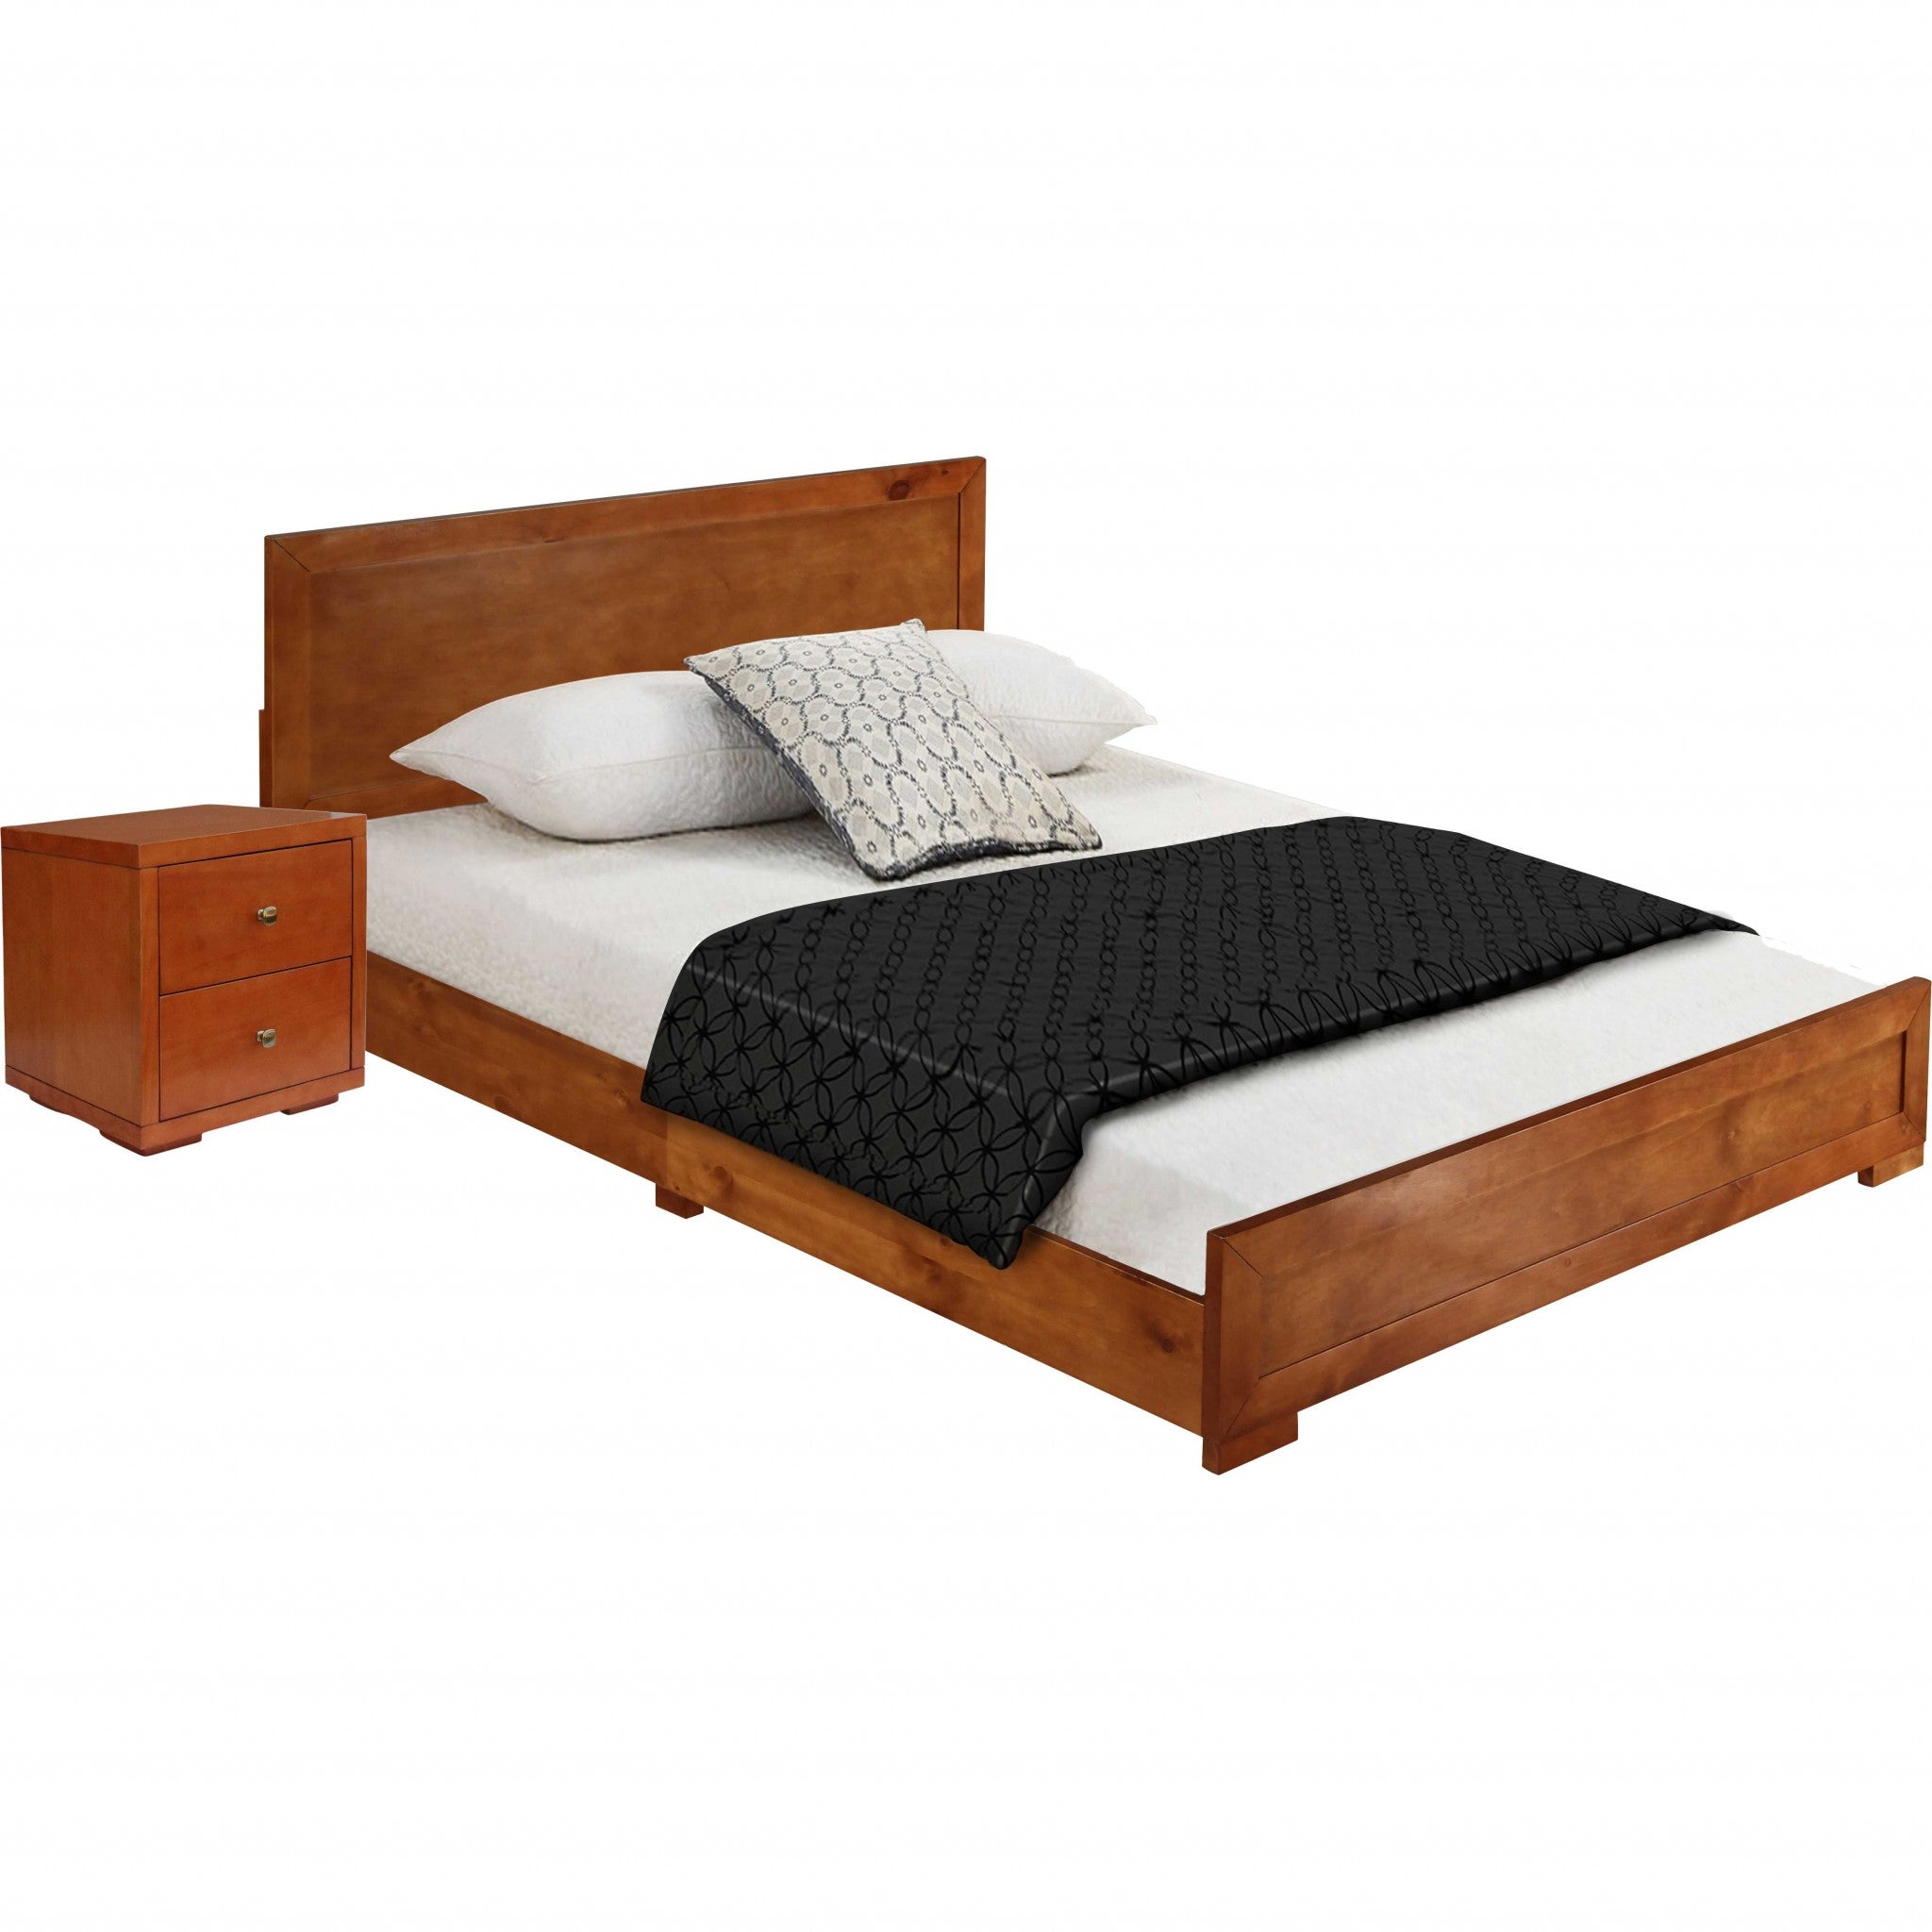 Moma Cherry Wood Platform Full Bed With Nightstand Default Title